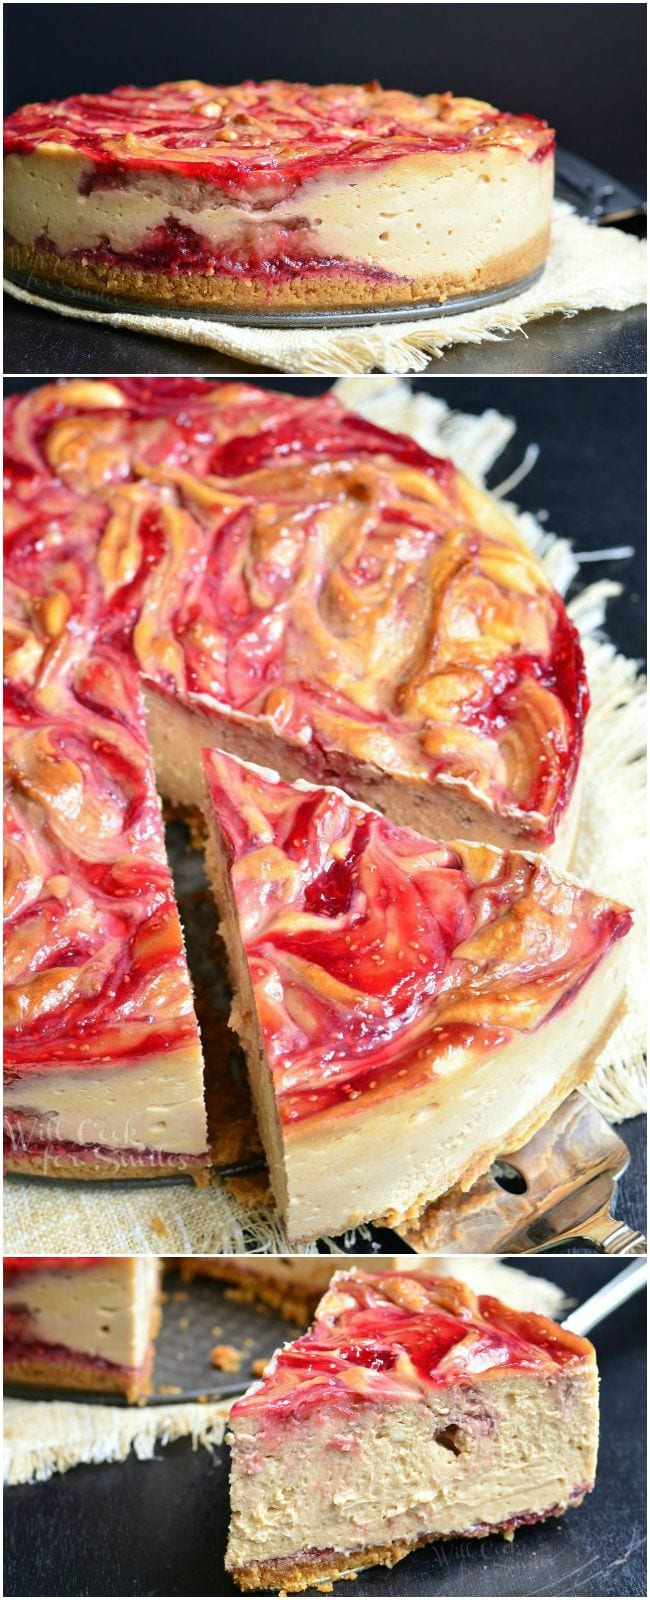 Three photos: Top shows Peanut Butter and Jelly Cheesecake as a whole. Middle photo shows a large piece being removed by a pie server. Bottom photo shows the piece of pie that was removed at an angle. In each photo, there are swirls of peanut butter and red jelly, with seeds, on top of the cheesecake.